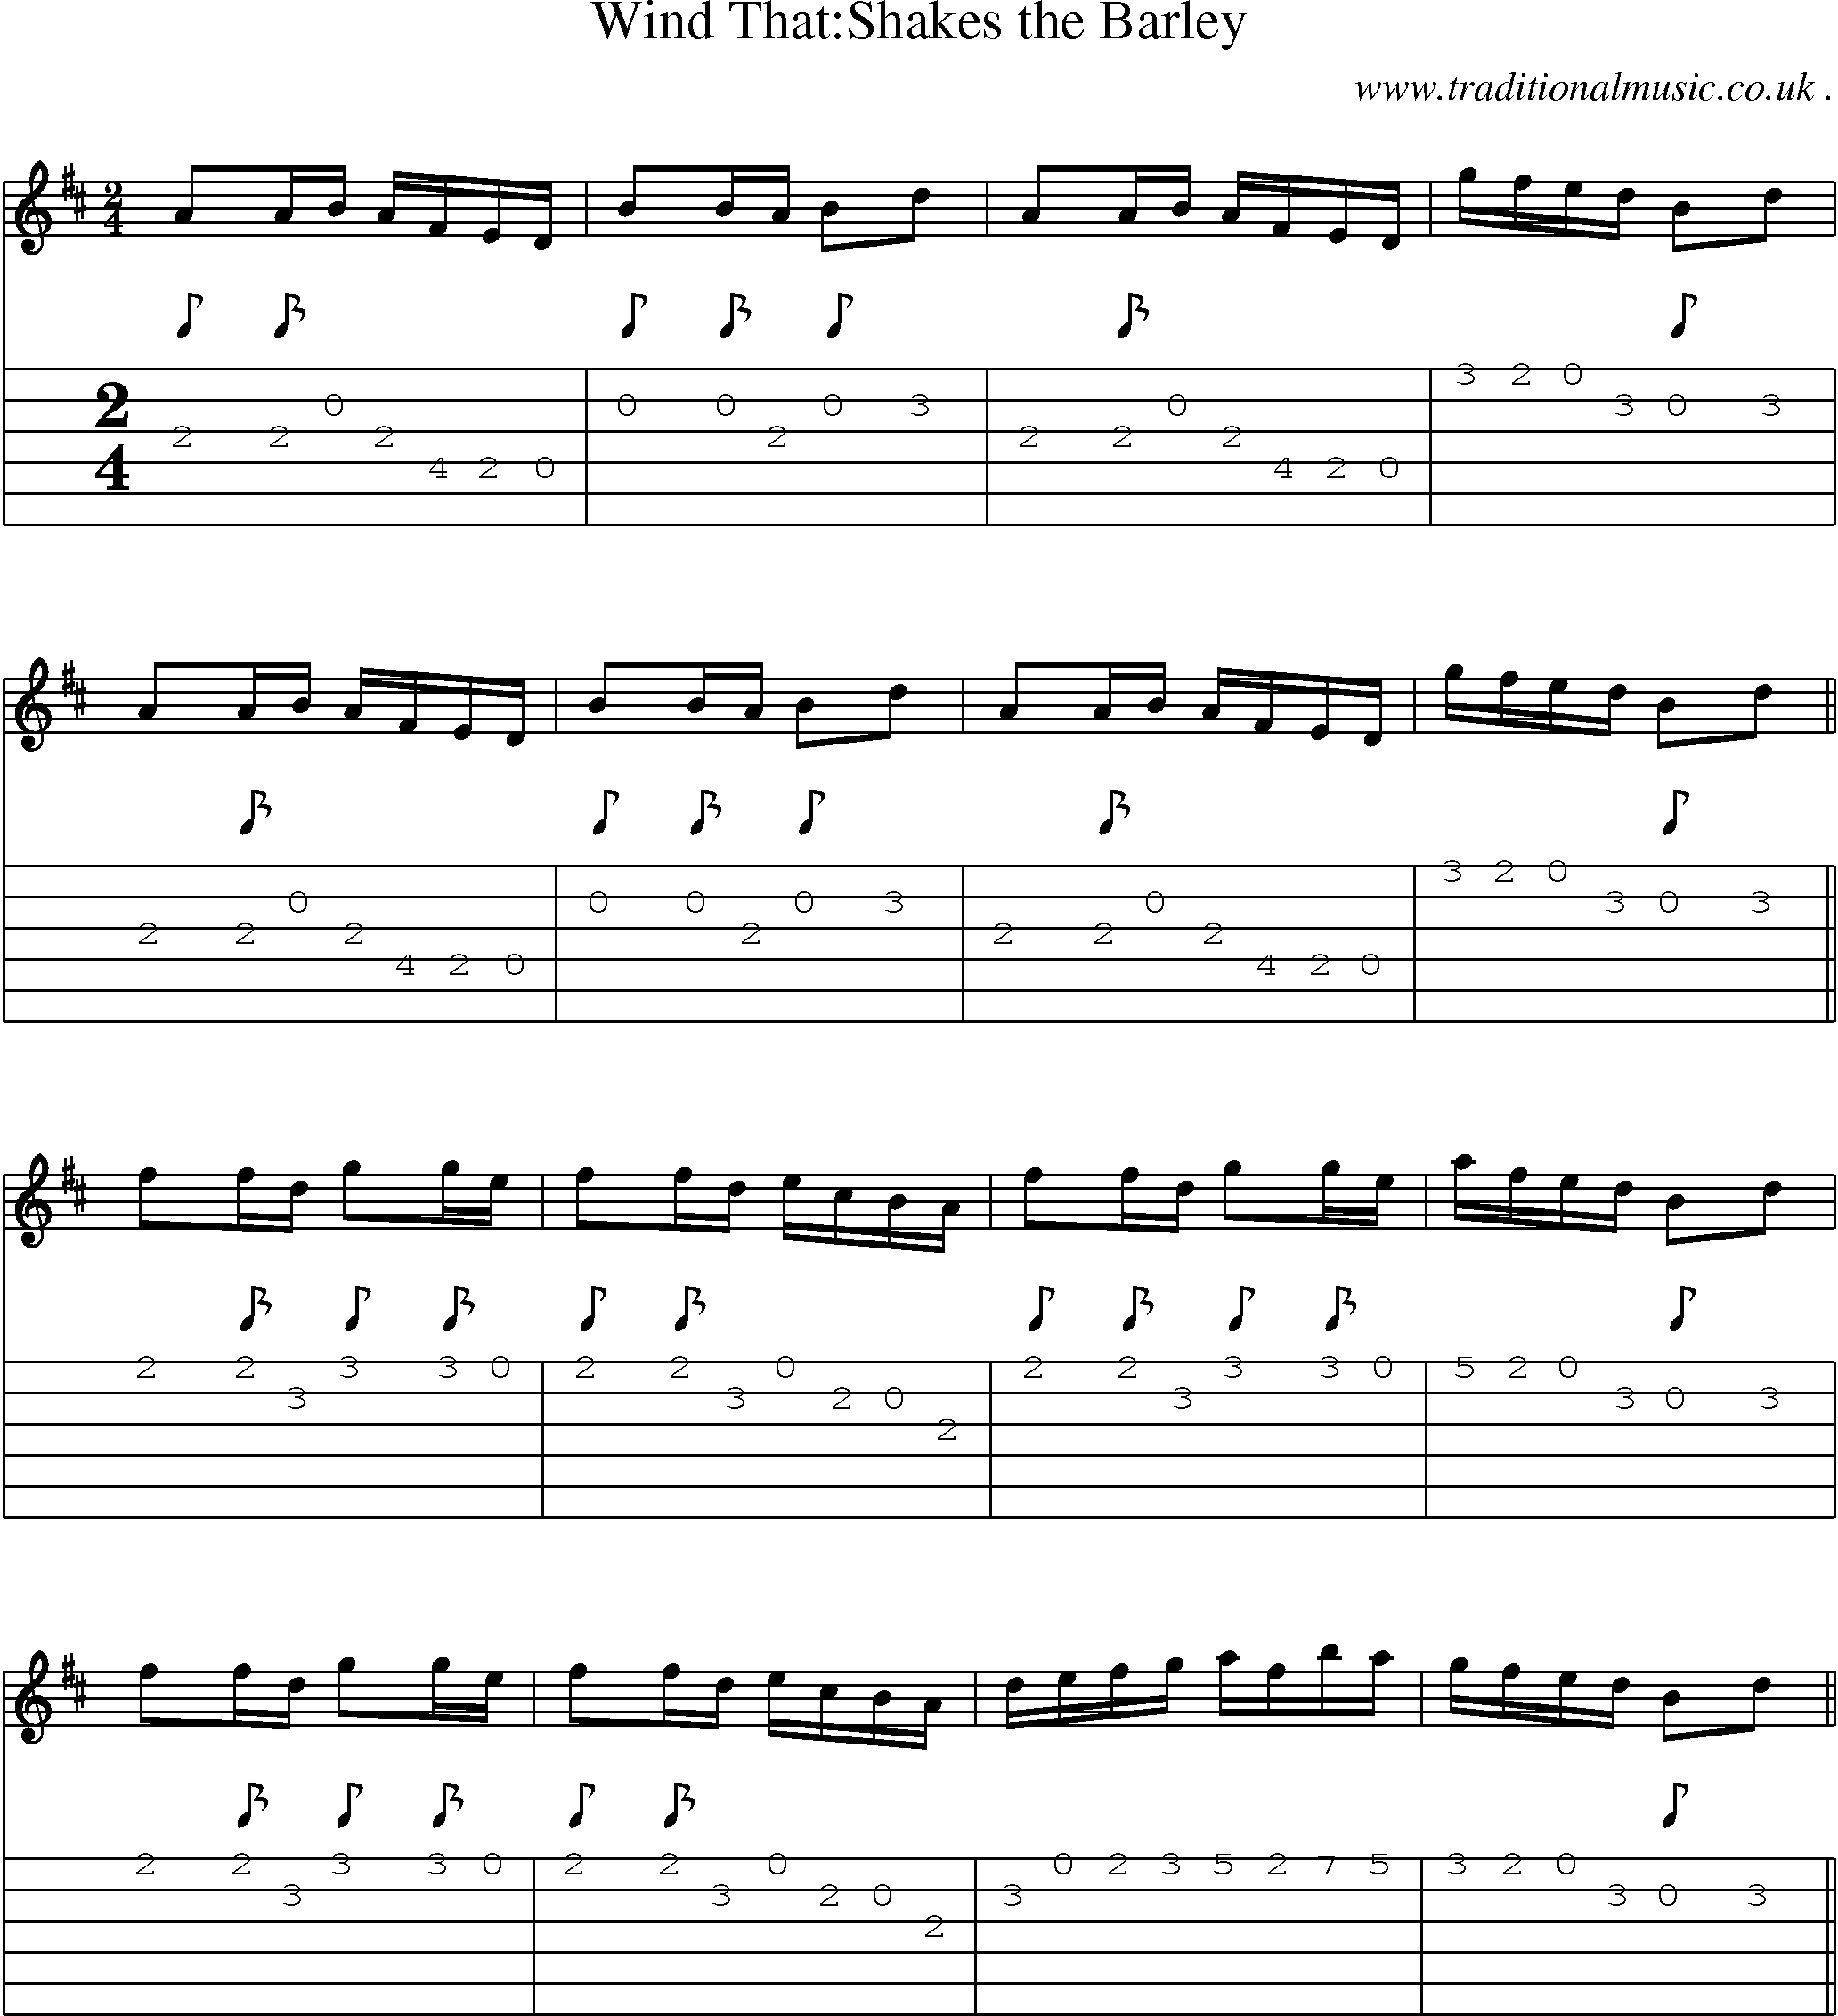 Sheet-Music and Guitar Tabs for Wind Thatshakes The Barley